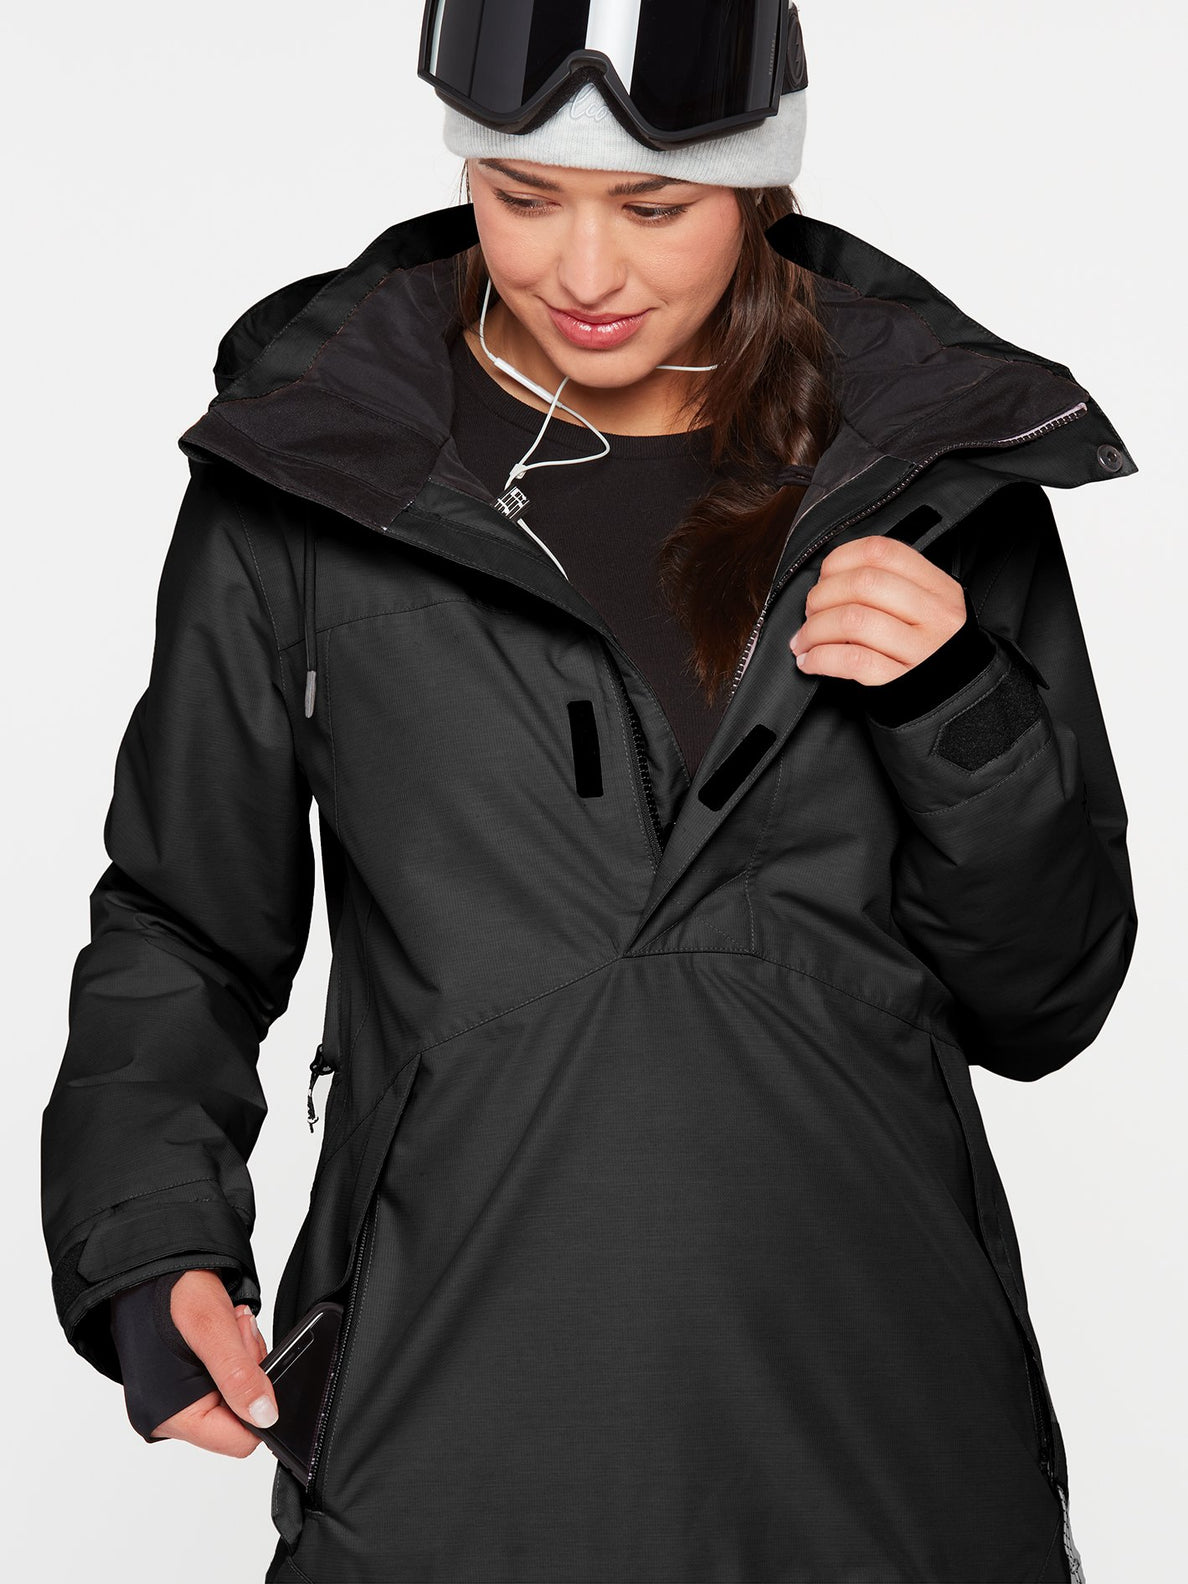 Fern Insulated Gore-Tex Pullover Jacket - BLACK (H0452204_BLK) [18]